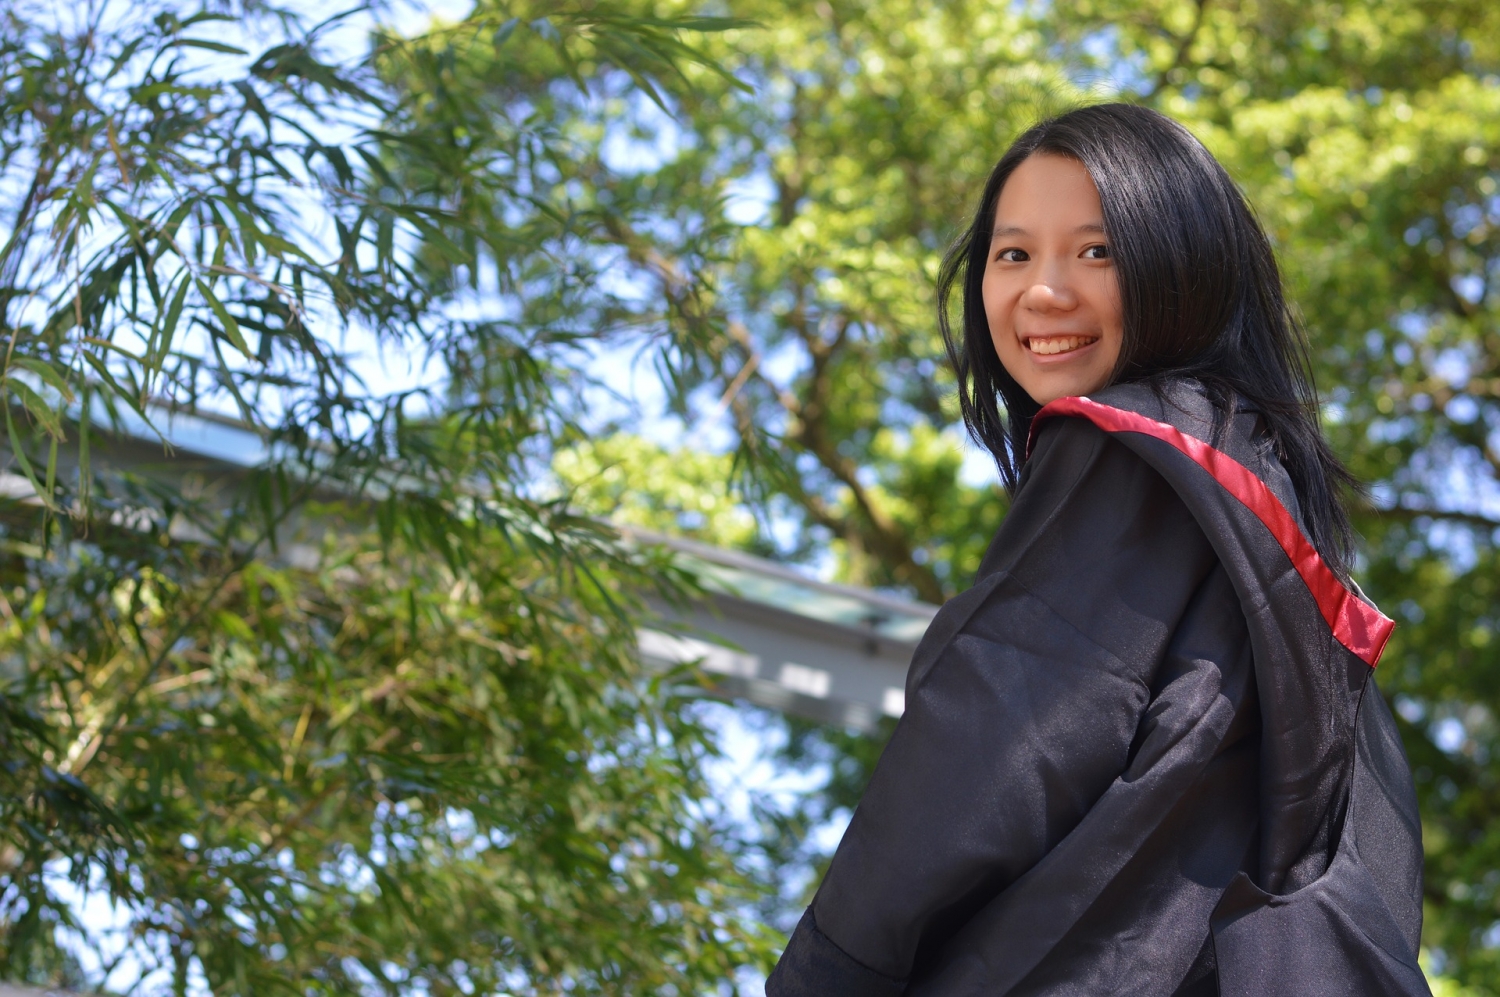 Young asian woman in a black graduation gown with red trim, smiling with green leafy foliage in the background